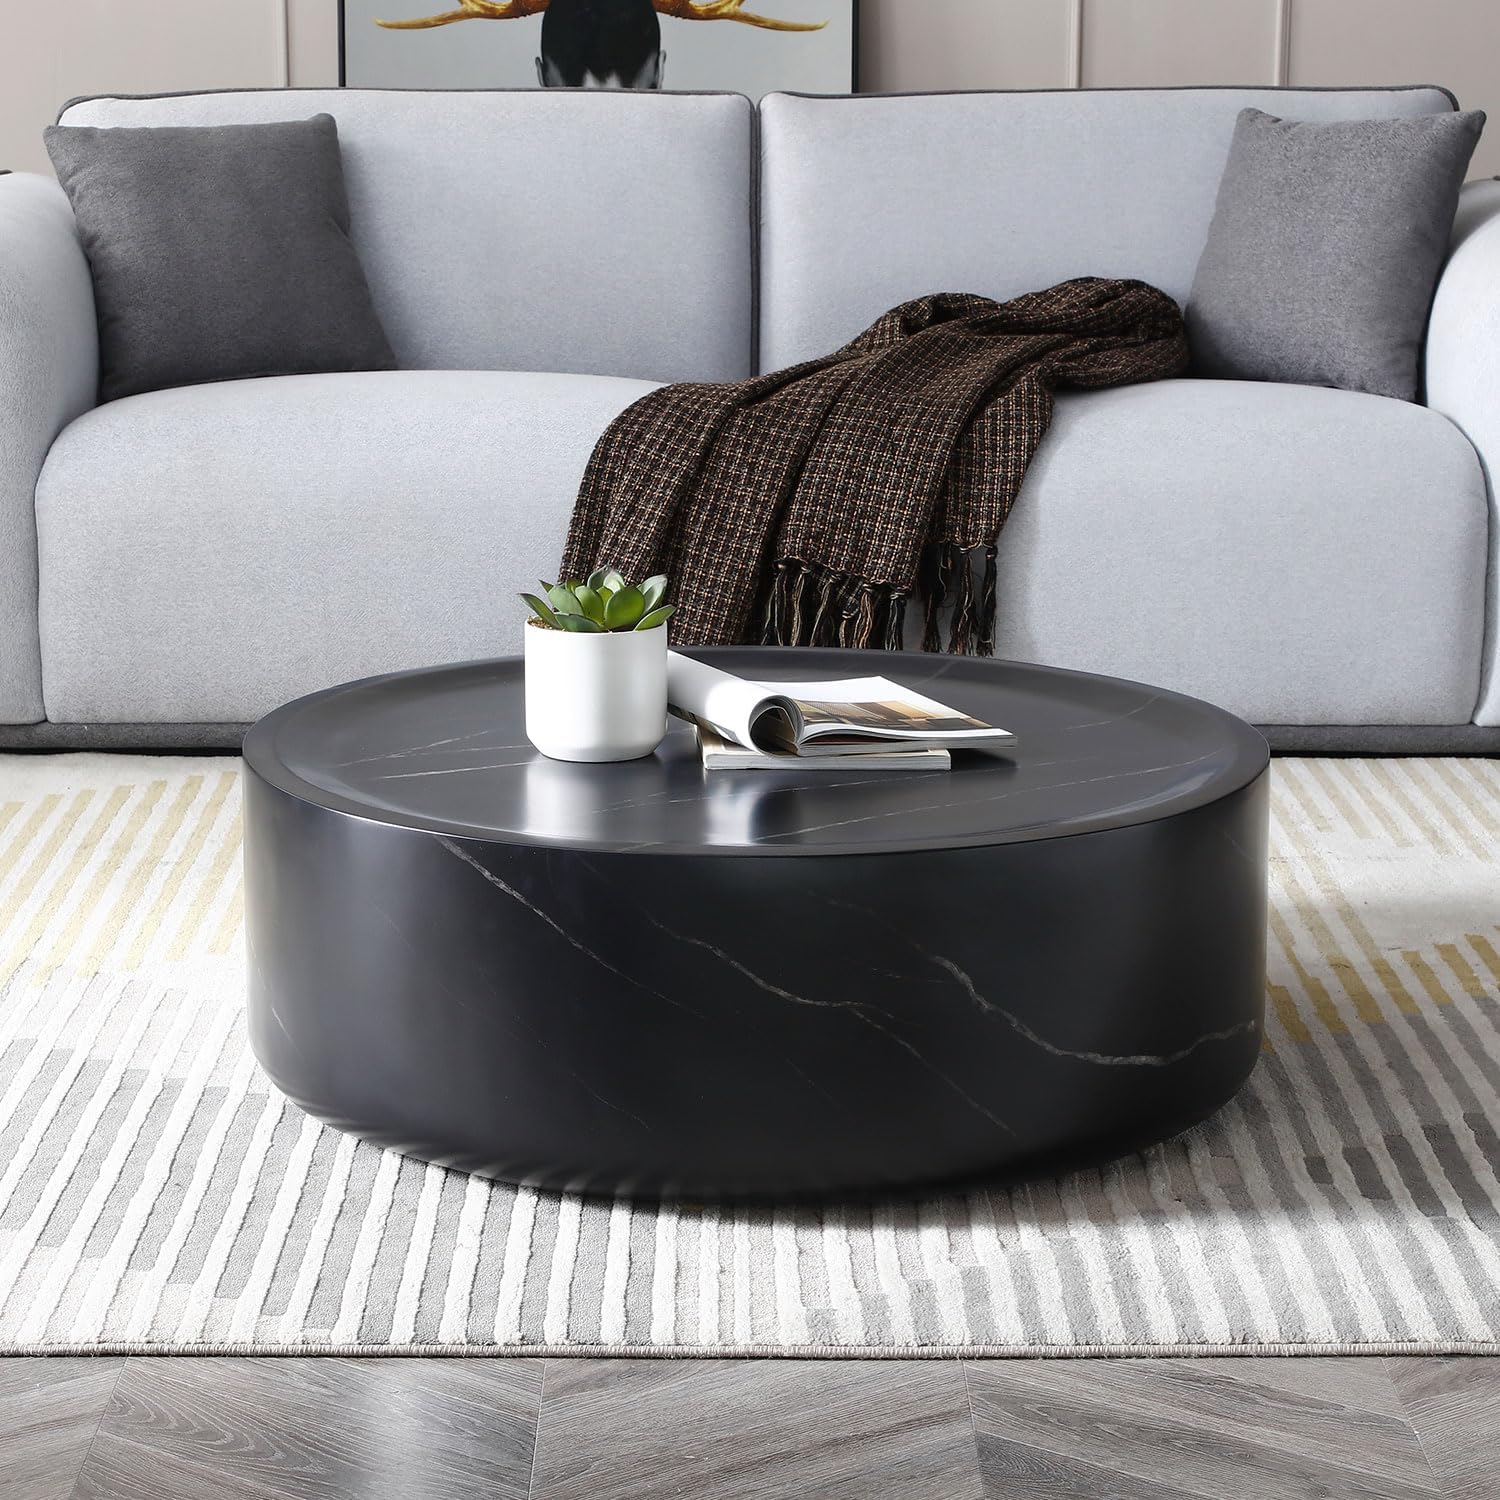 WILLIAMSPACE 35.43 Round Black Coffee Table with Marble Texture, Modern Drum Circle Fiberglass Coffee Table Side Table End Table for Living Room, 35.43*11.81H (Matte Black-Low Coffee Table)